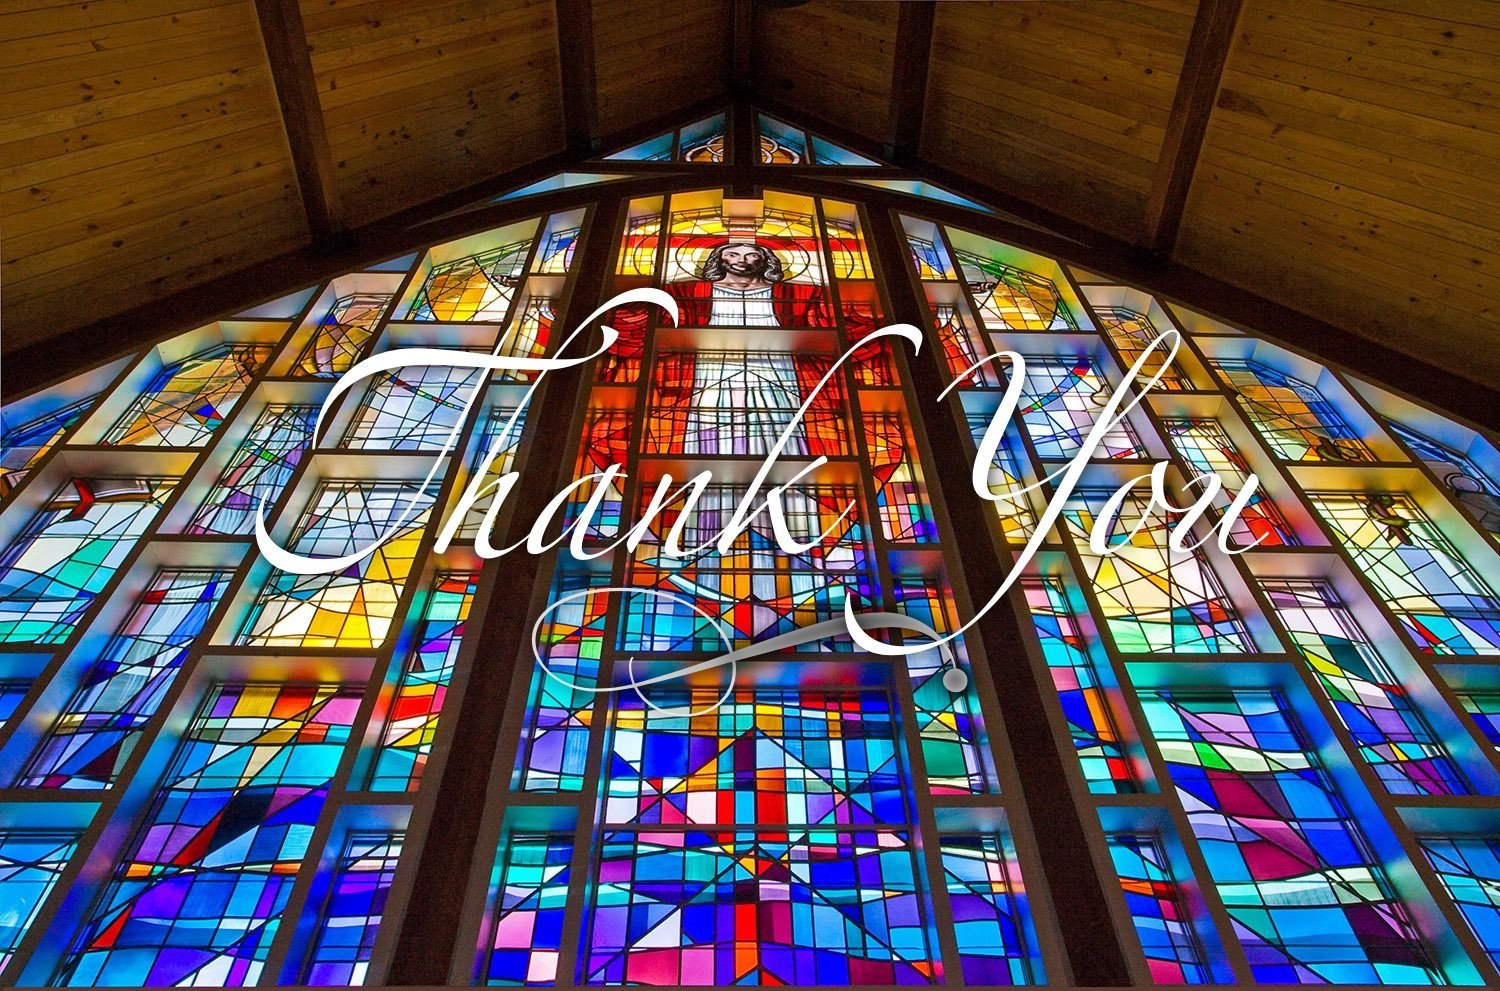 "Thank You" superimposed on Hendricks Avenue Baptist Church stained glass